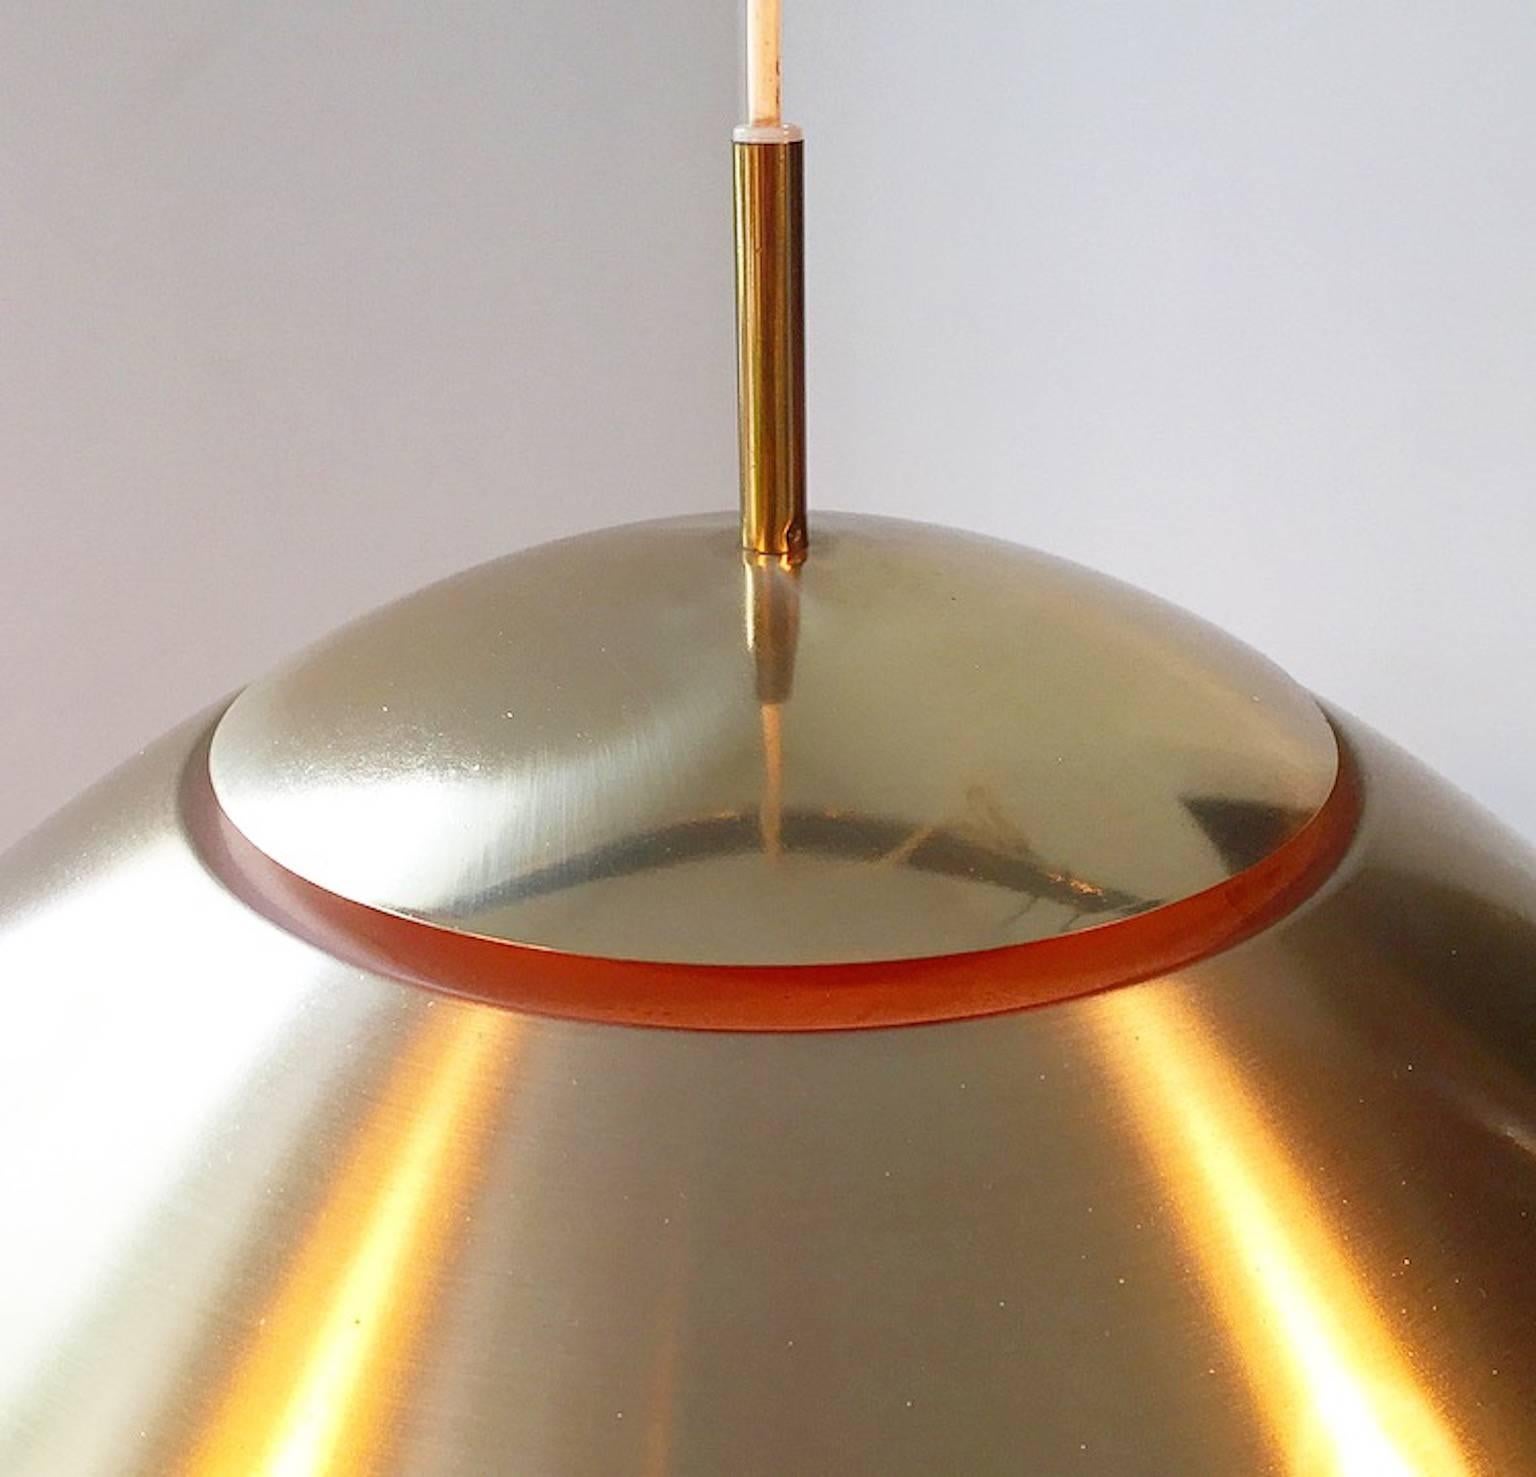 Classic Mid-Century ceiling light by Vilhelm Vohlert for Nordisk Solar company of Denmark mid-1960s.

The light consists of a large brass shade divided in two with orange details. Comes with the original diffuser.

Ideal for the modern